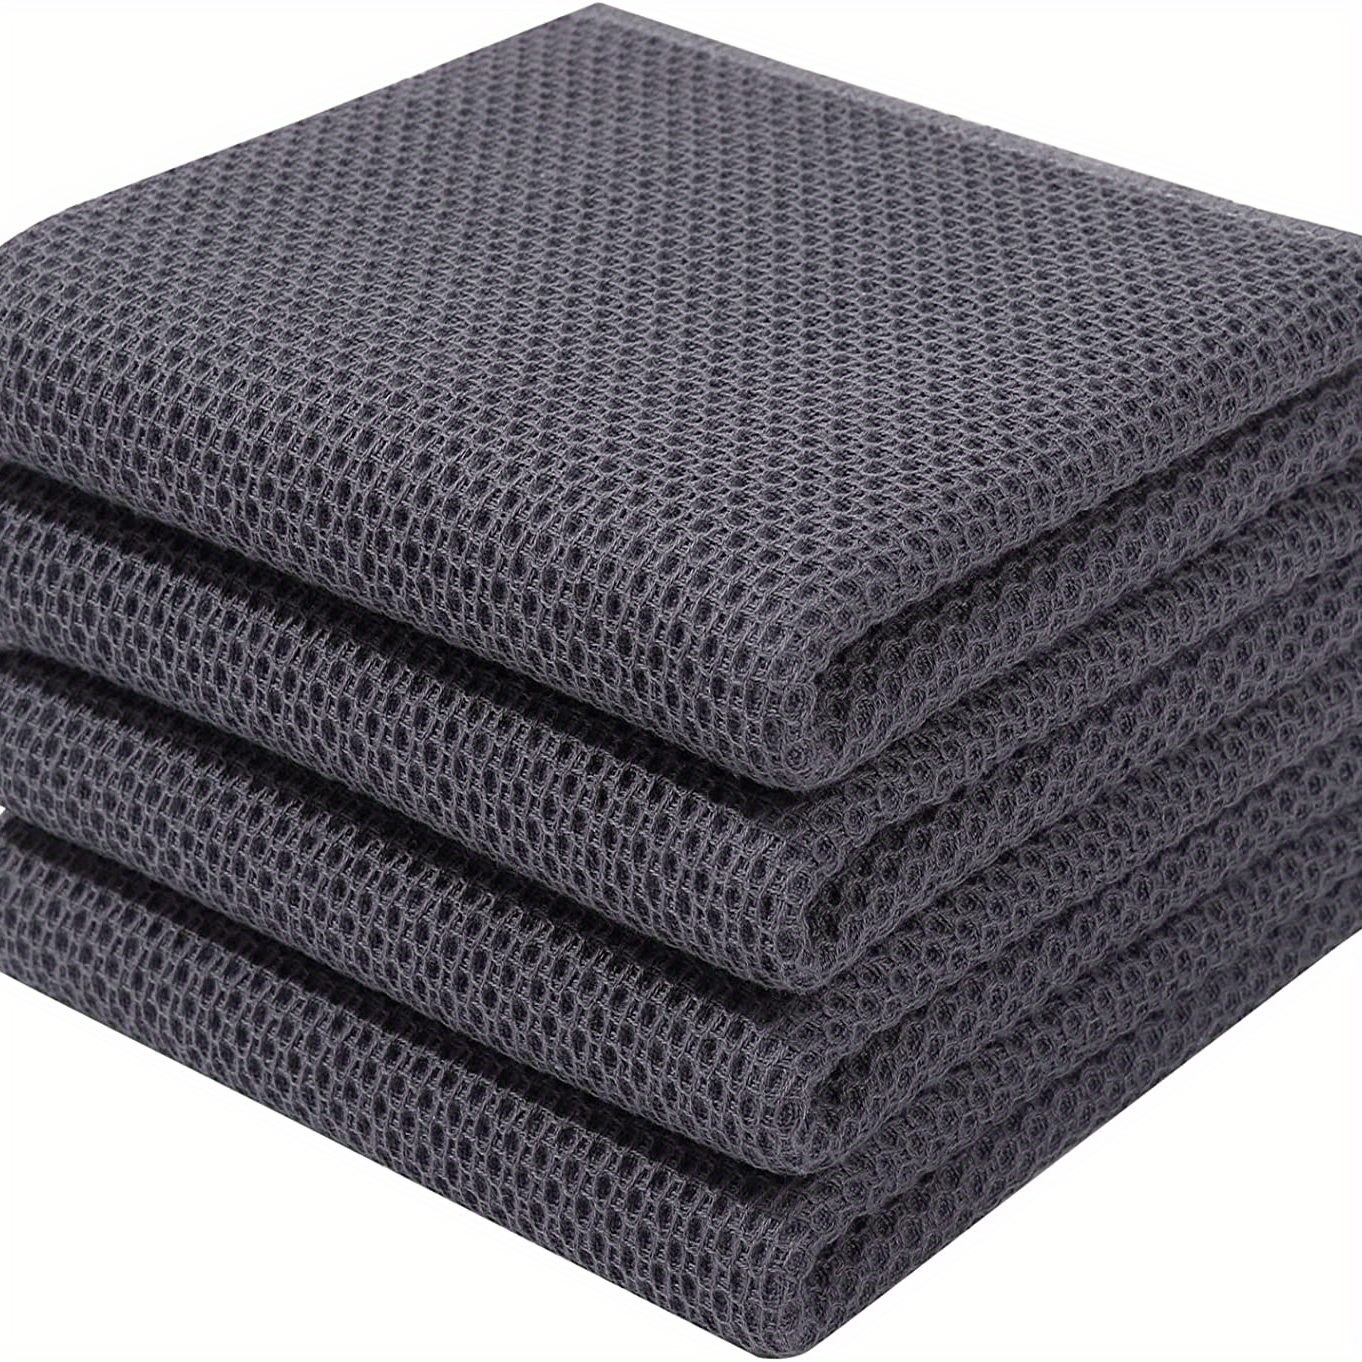 12-Pack Absorbent and Super Soft Microfiber Dish Cloths Waffle